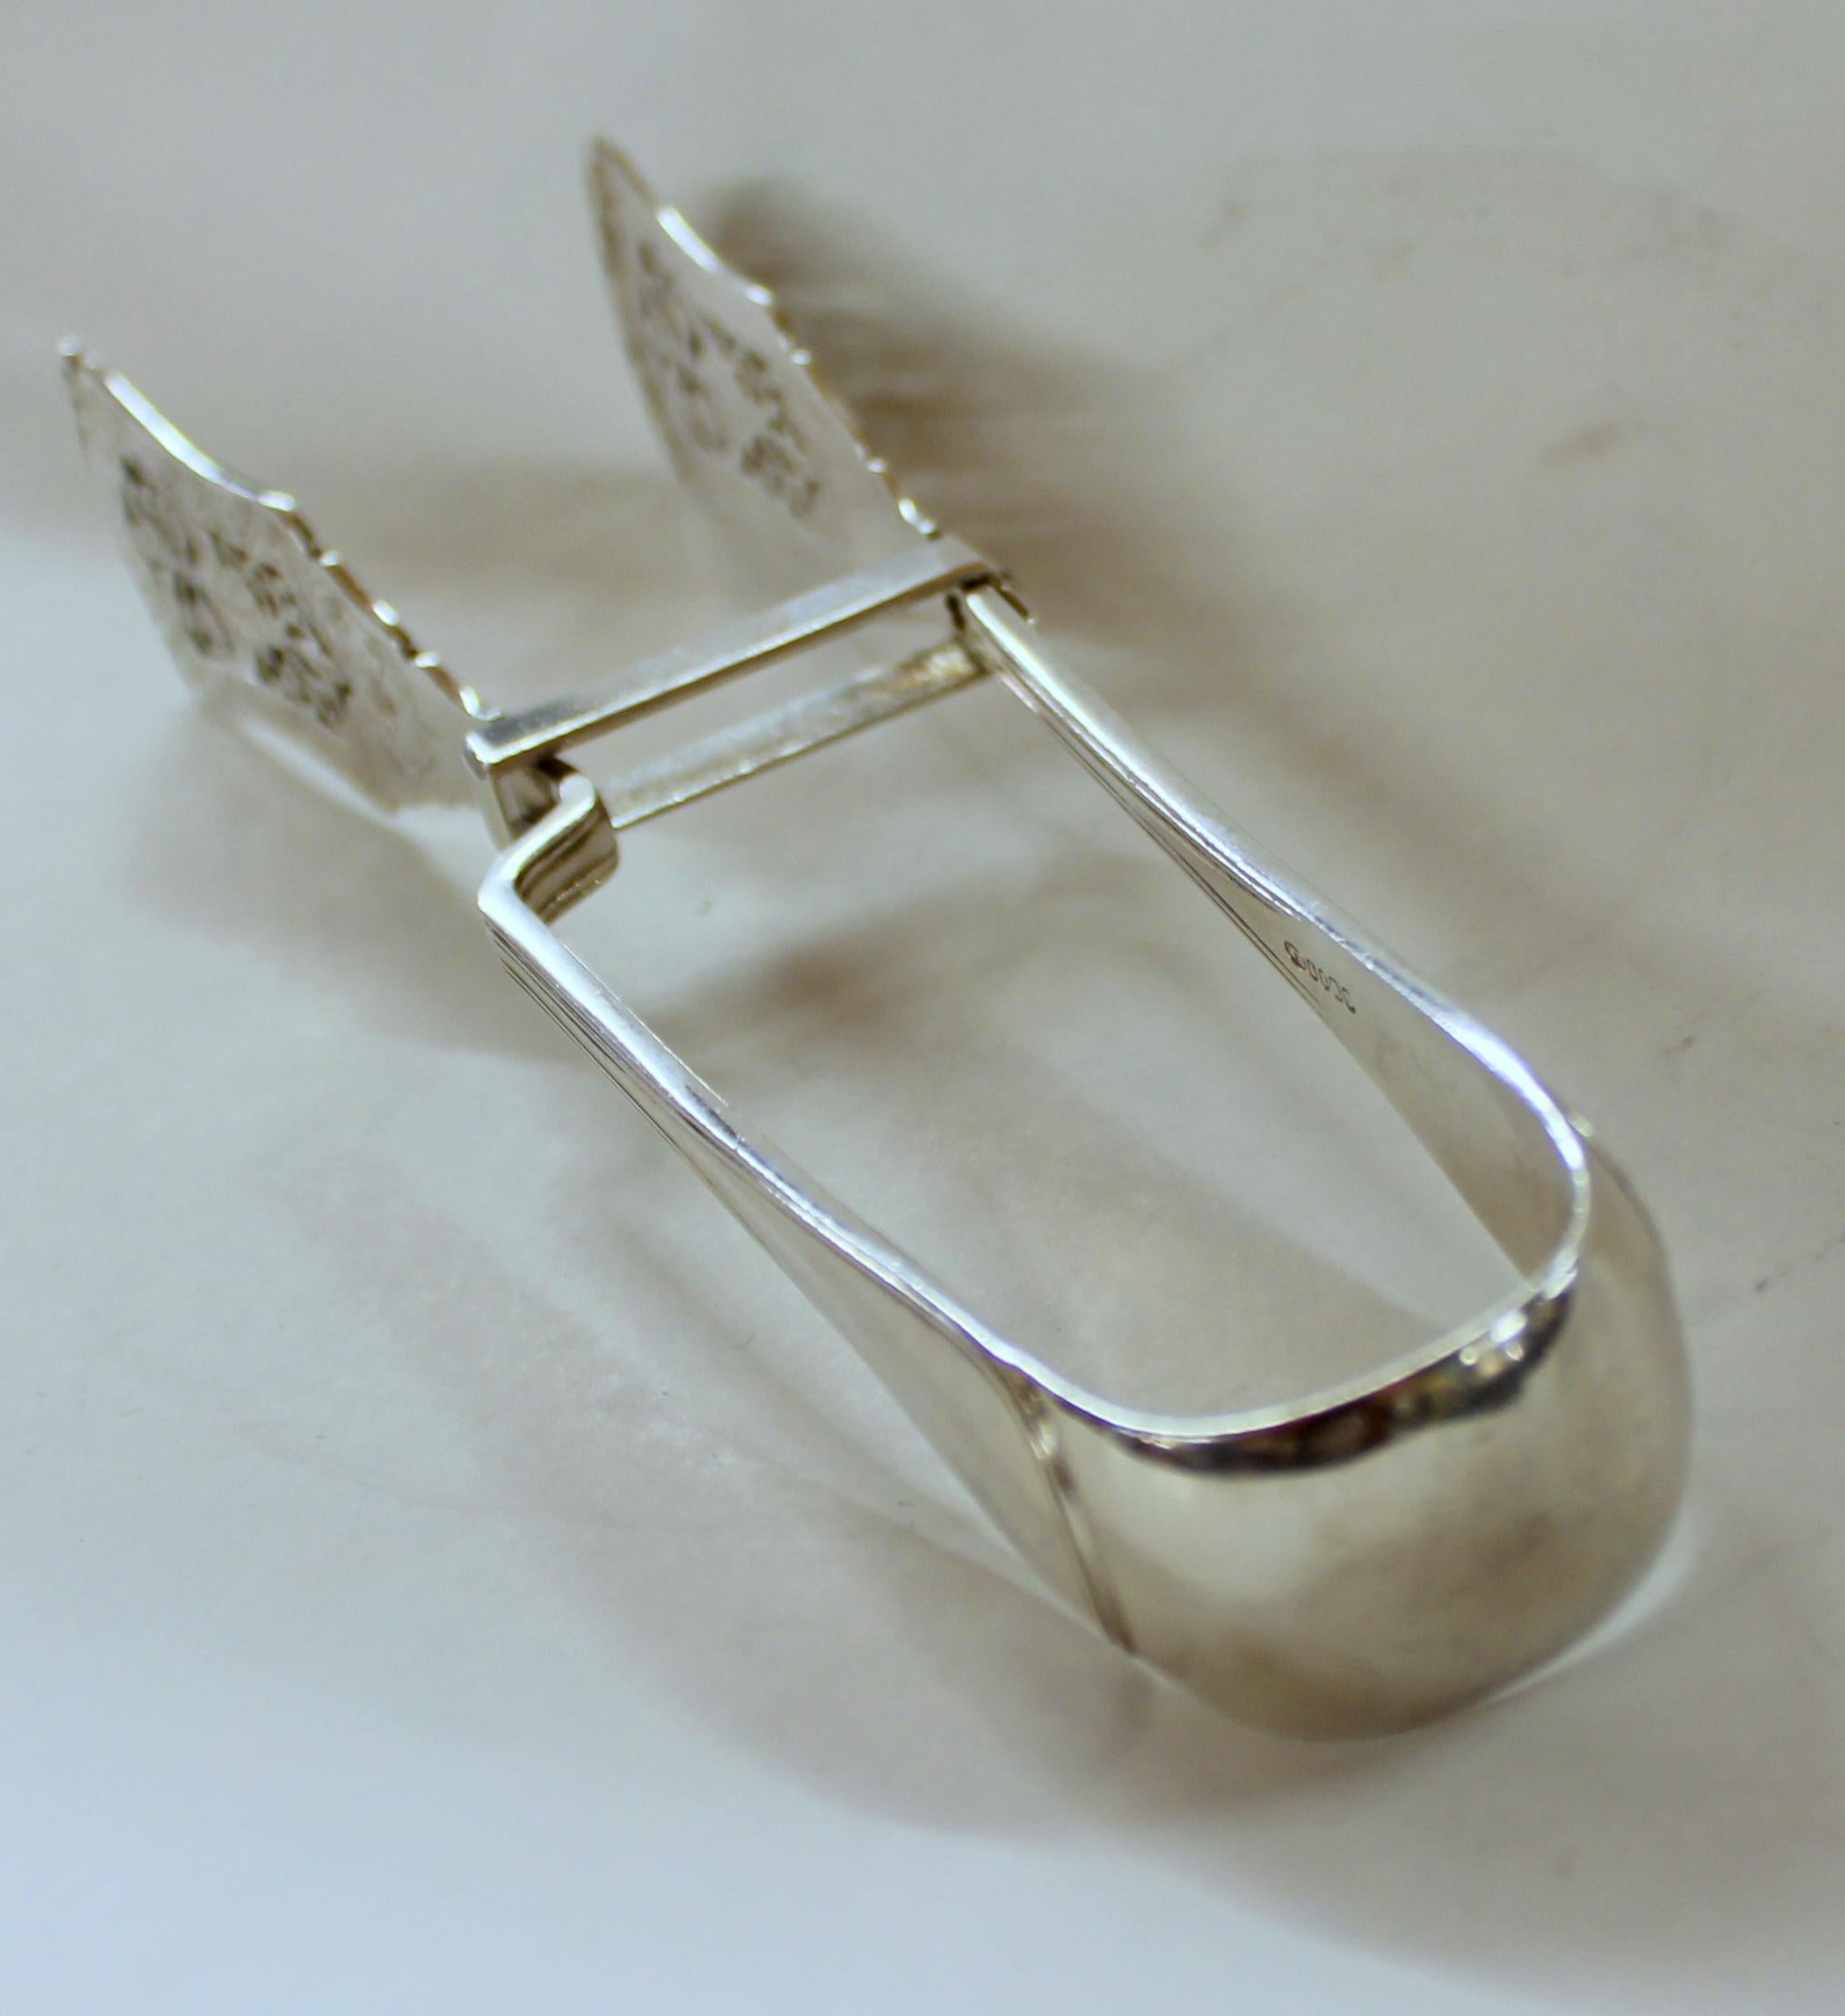 Hand-Crafted Old English Silver Plate Hand Engraved and Pierced Asparagus or Sandwich Tongs